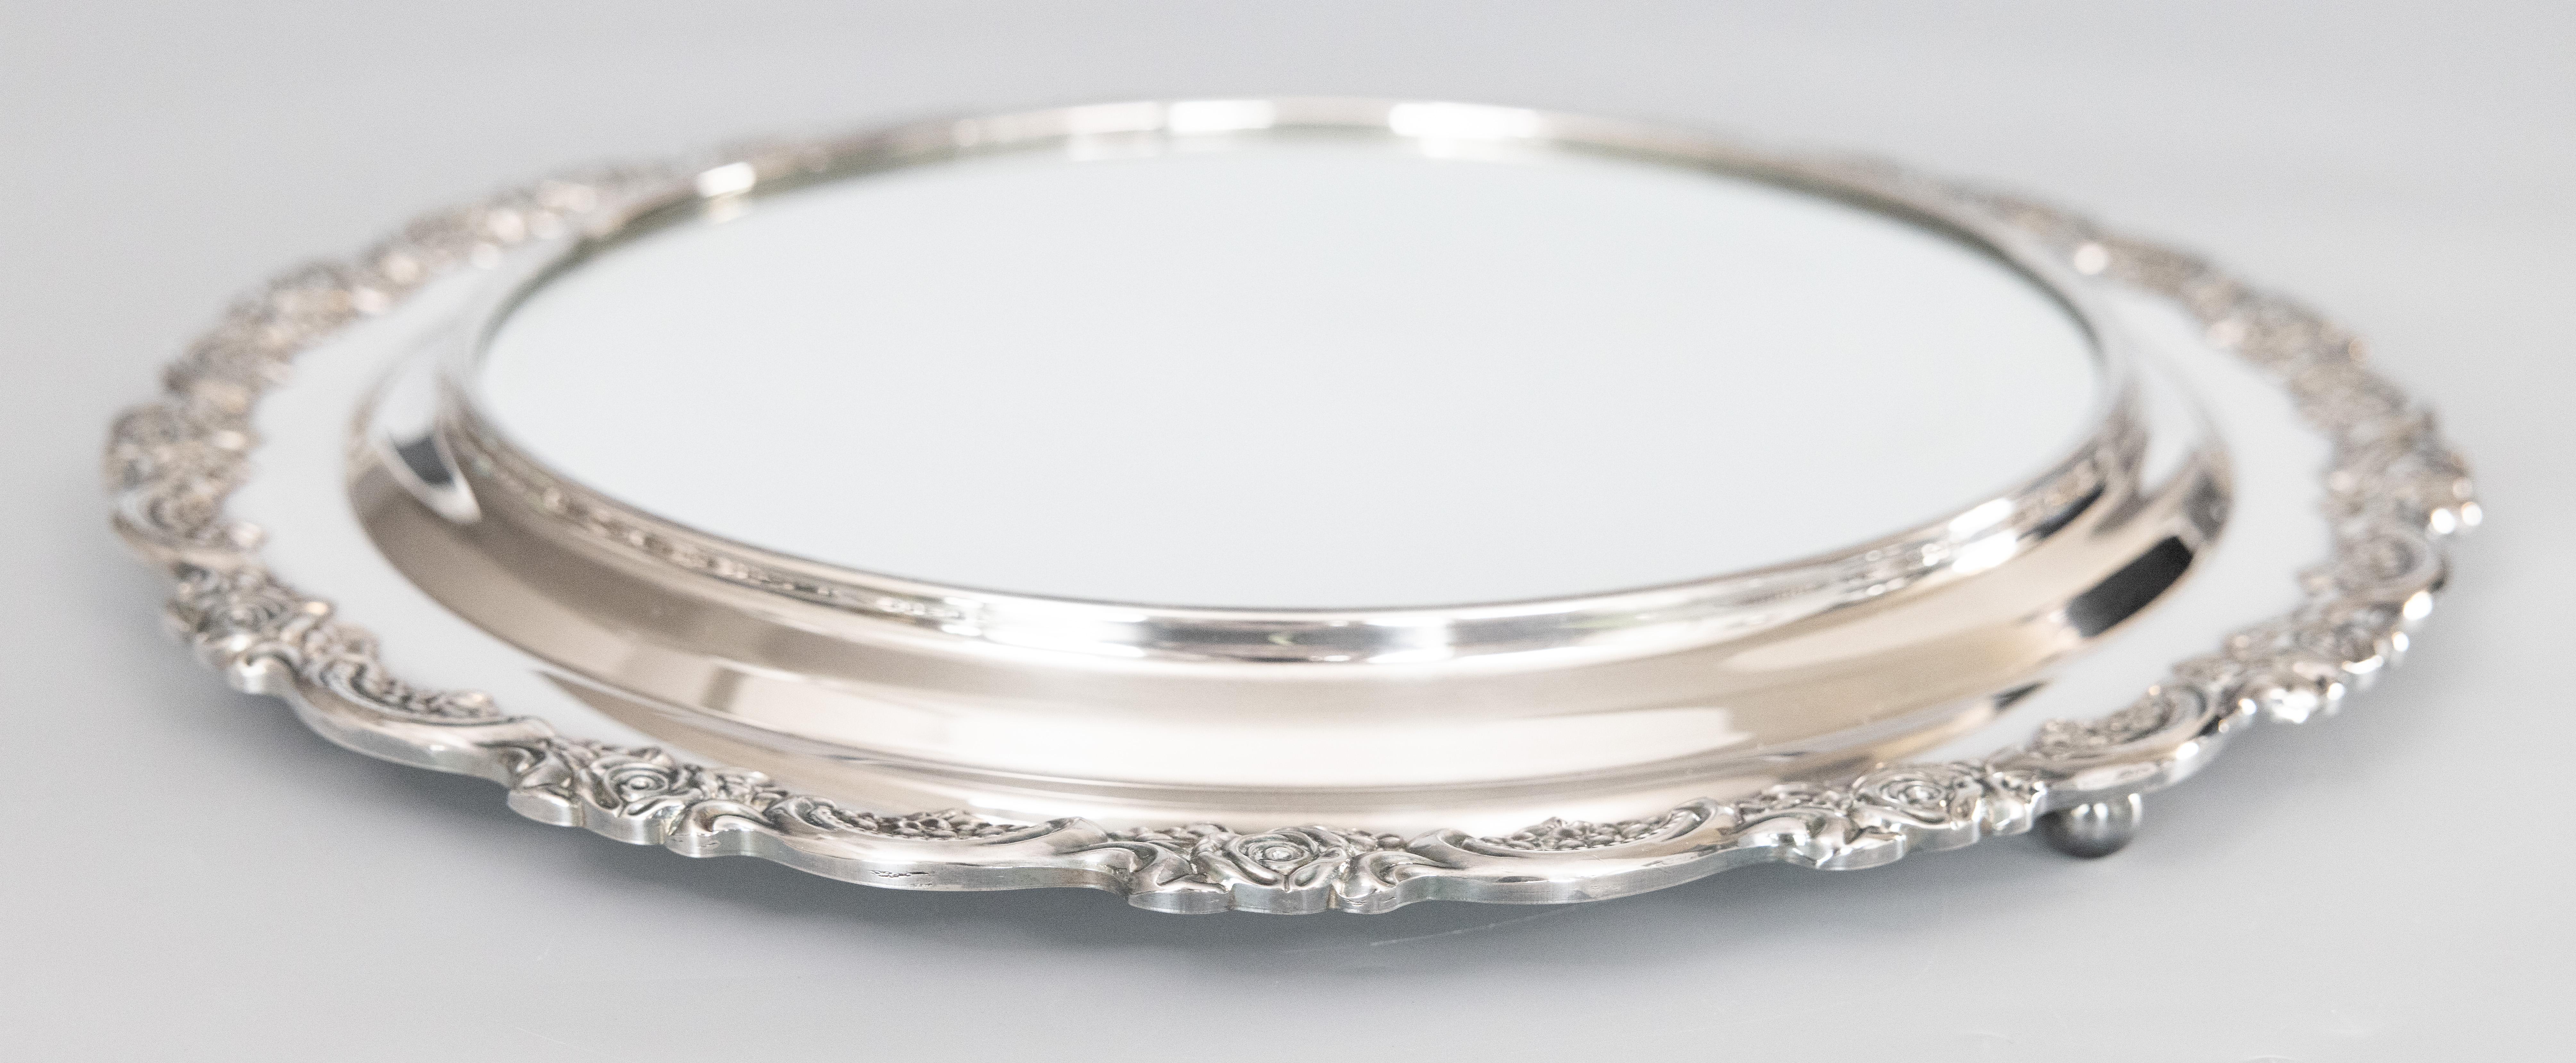 Vintage Silver Plate Mirror Plateau Tray, circa 1950 For Sale 3